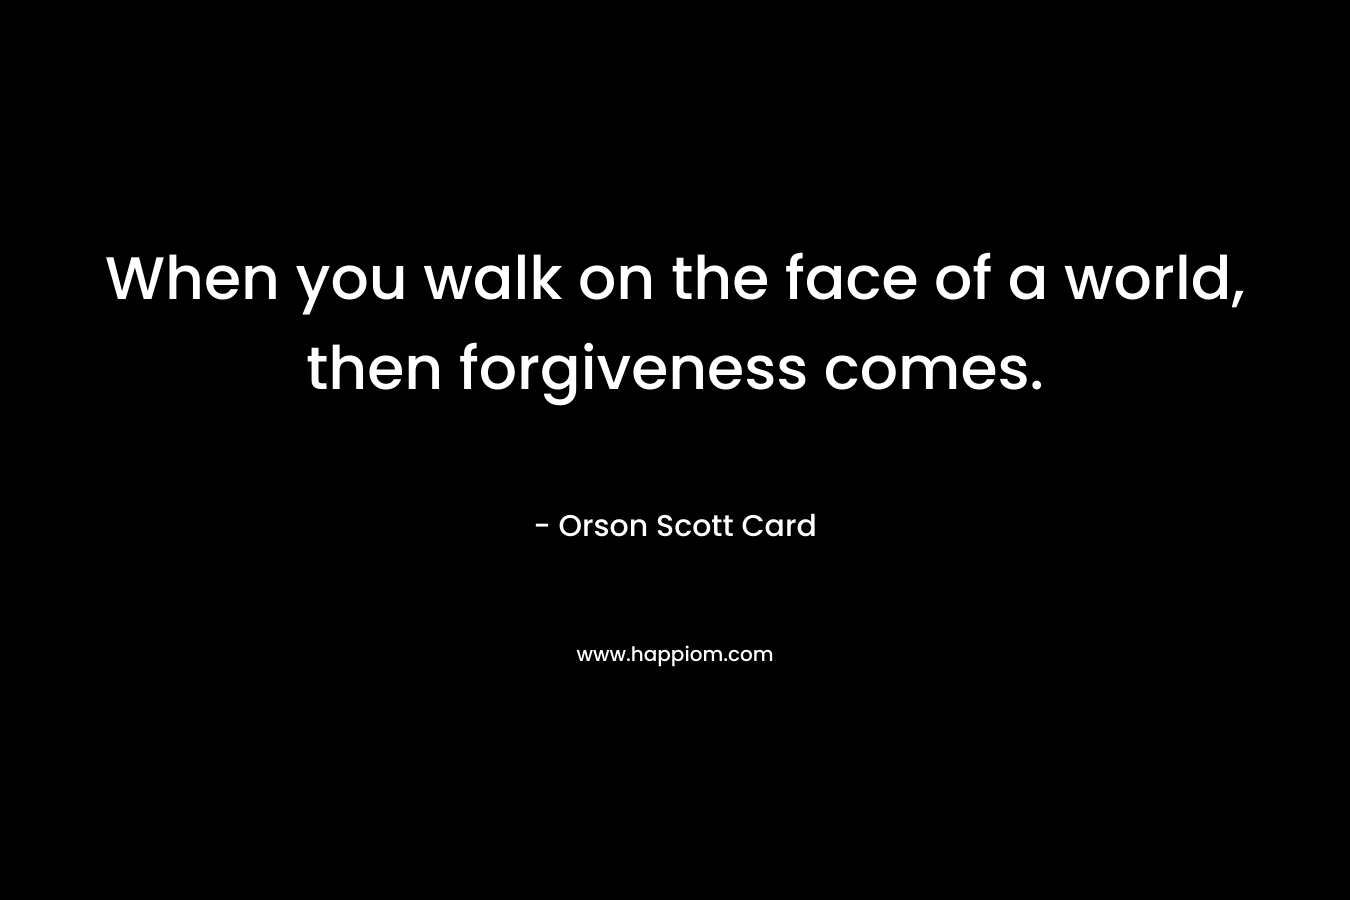 When you walk on the face of a world, then forgiveness comes.